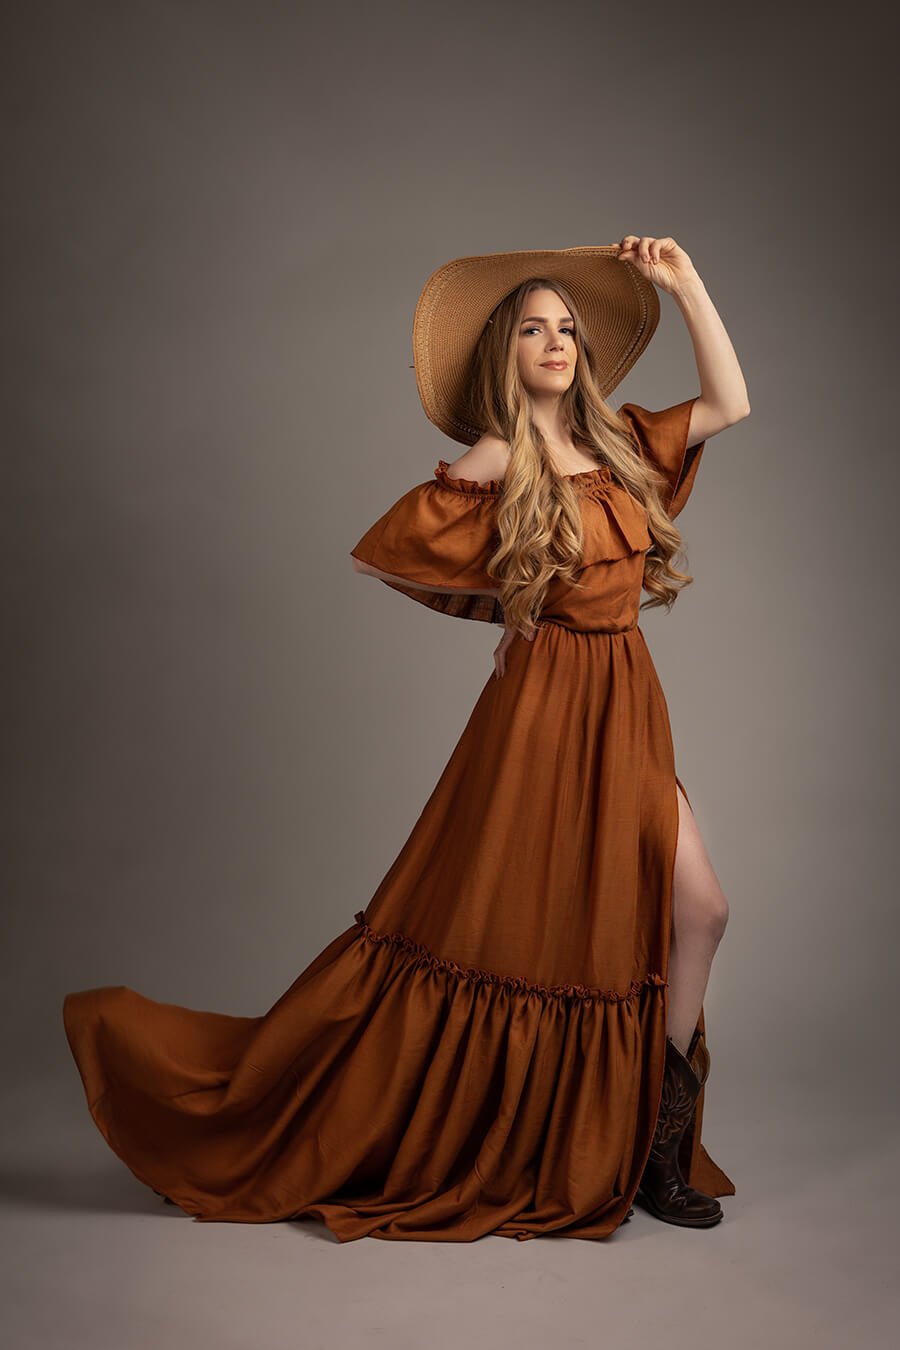 blond model pose sin a studio during a boho chic photoshoot. she has a long cognac dress with ruffle details and a brown hat to match the style. 